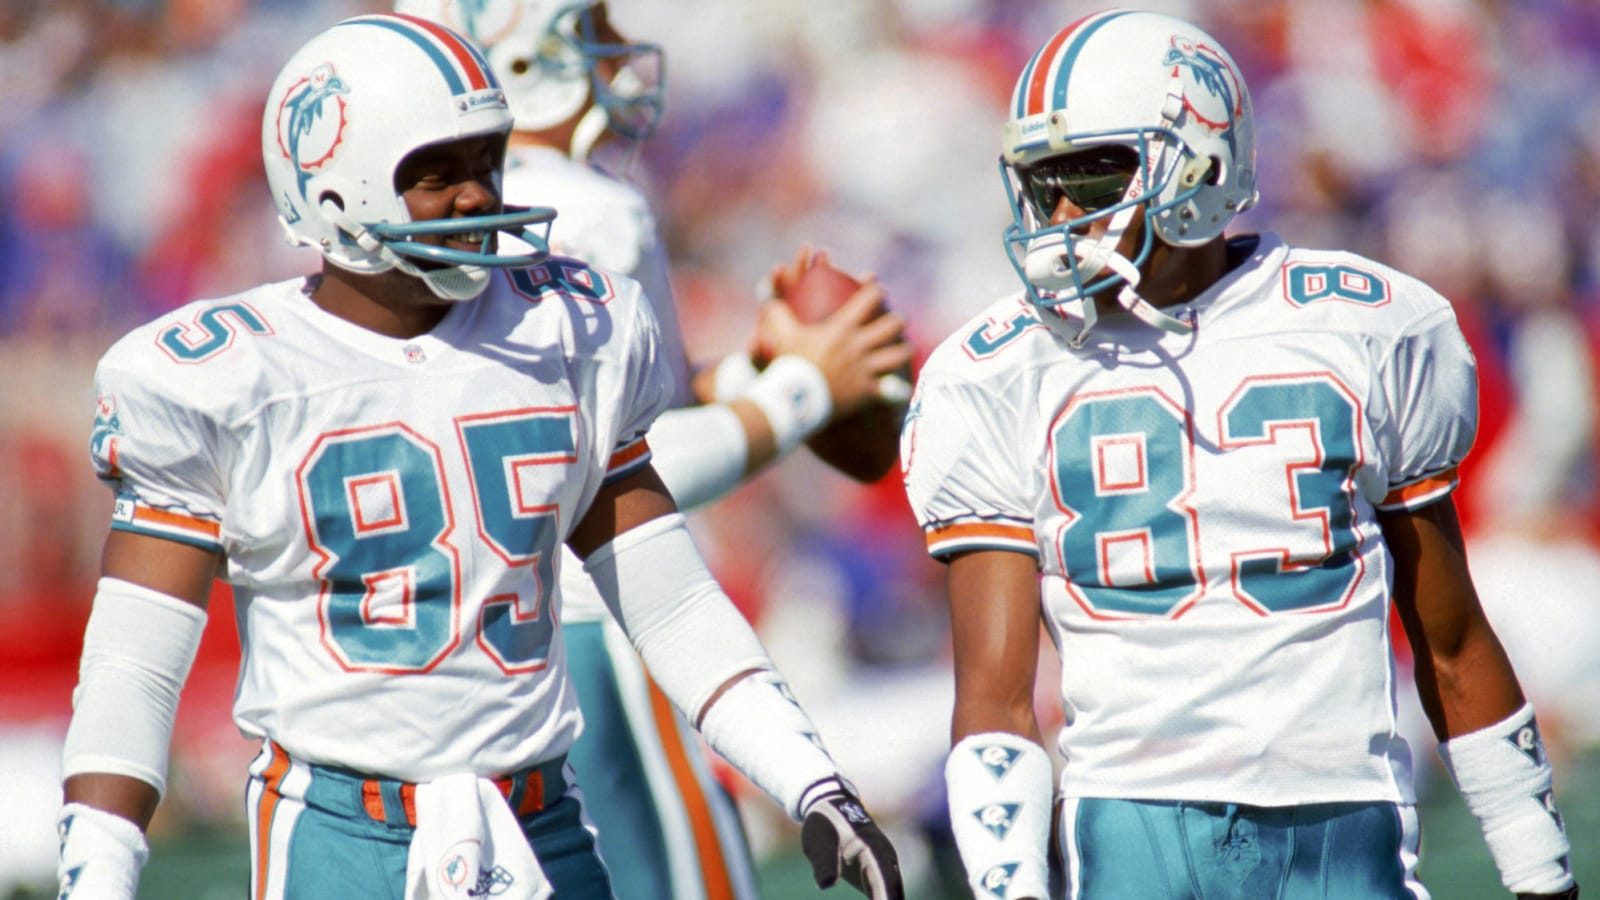 The 'Dolphins 1,000 yard receivers' quiz